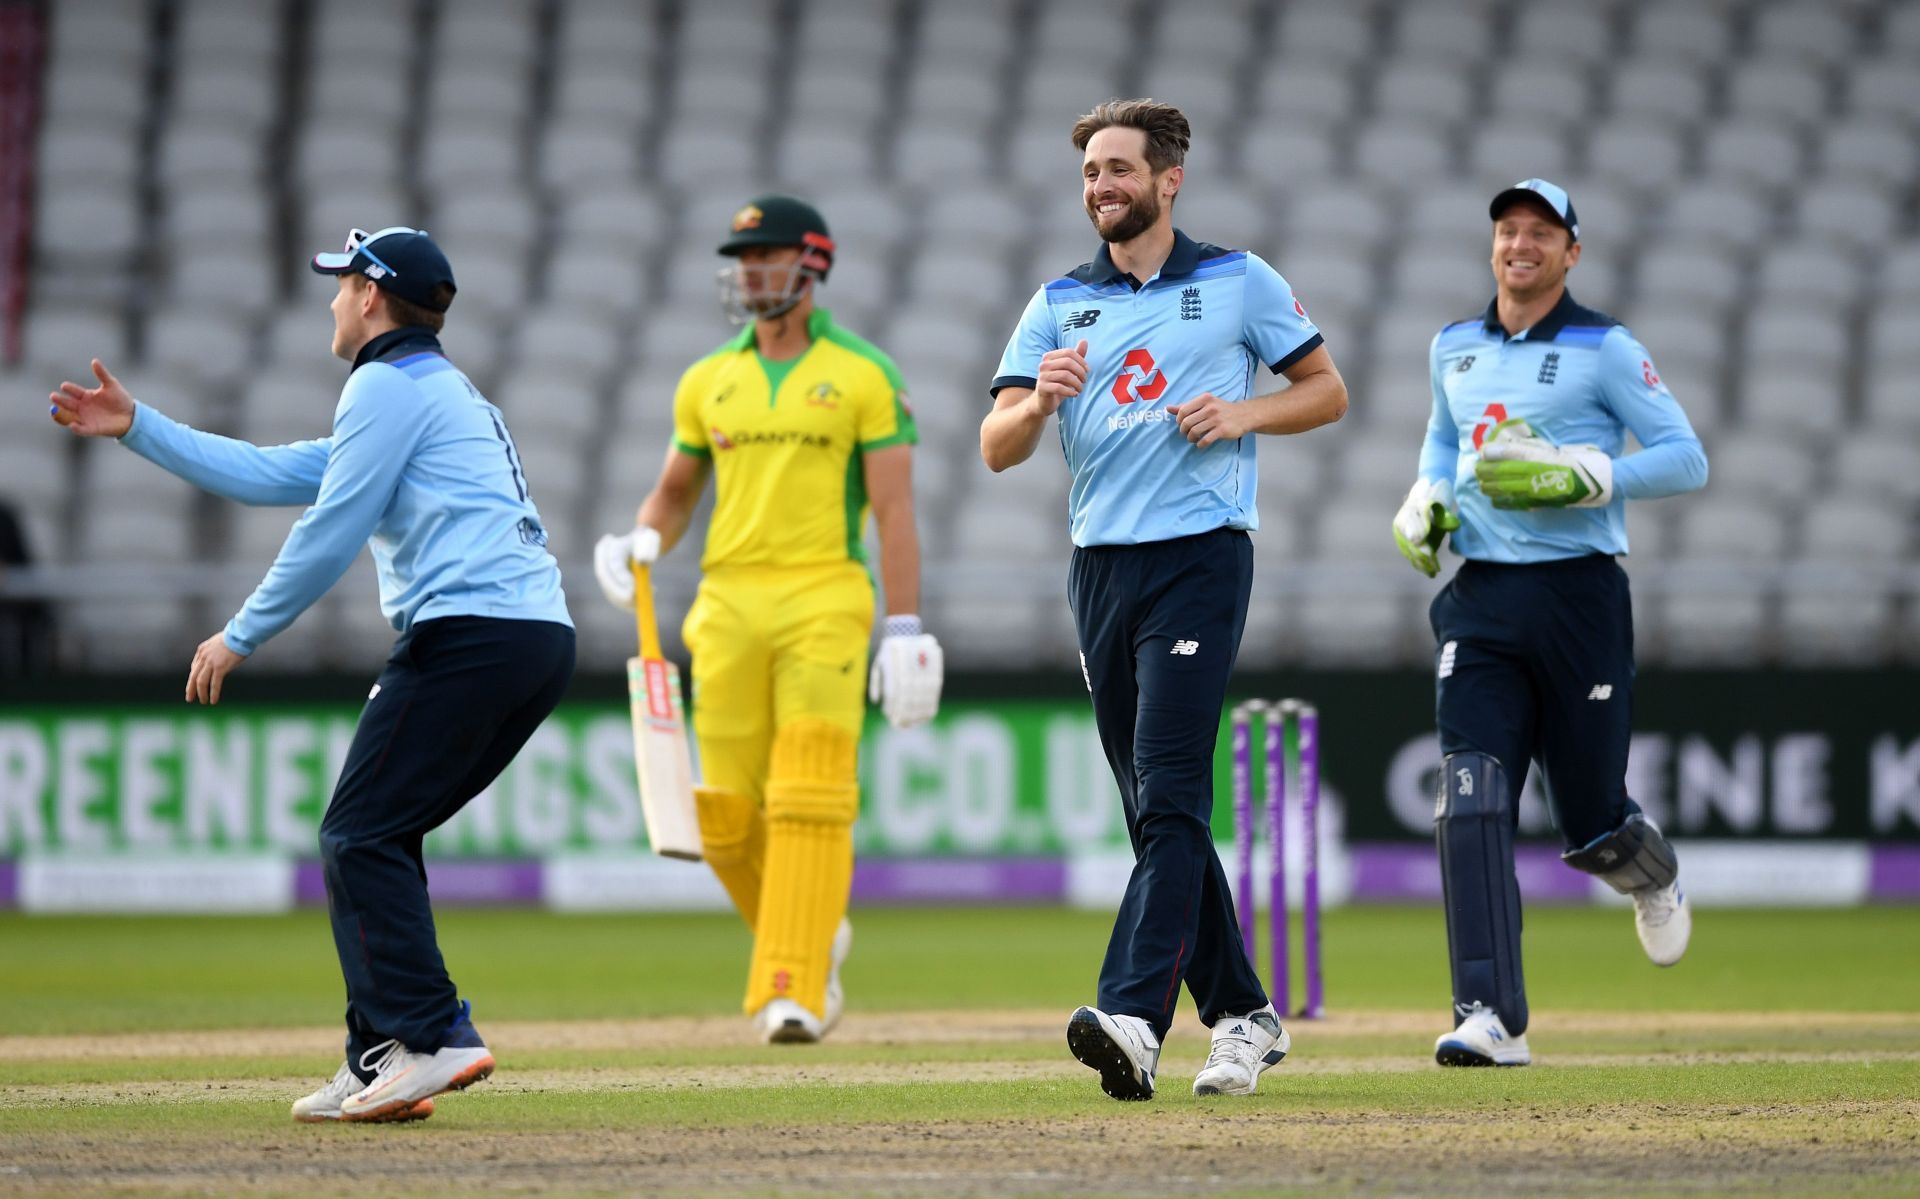 Chris Woakes will be the player to look out for in this ICC T20 World Cup 2021 match